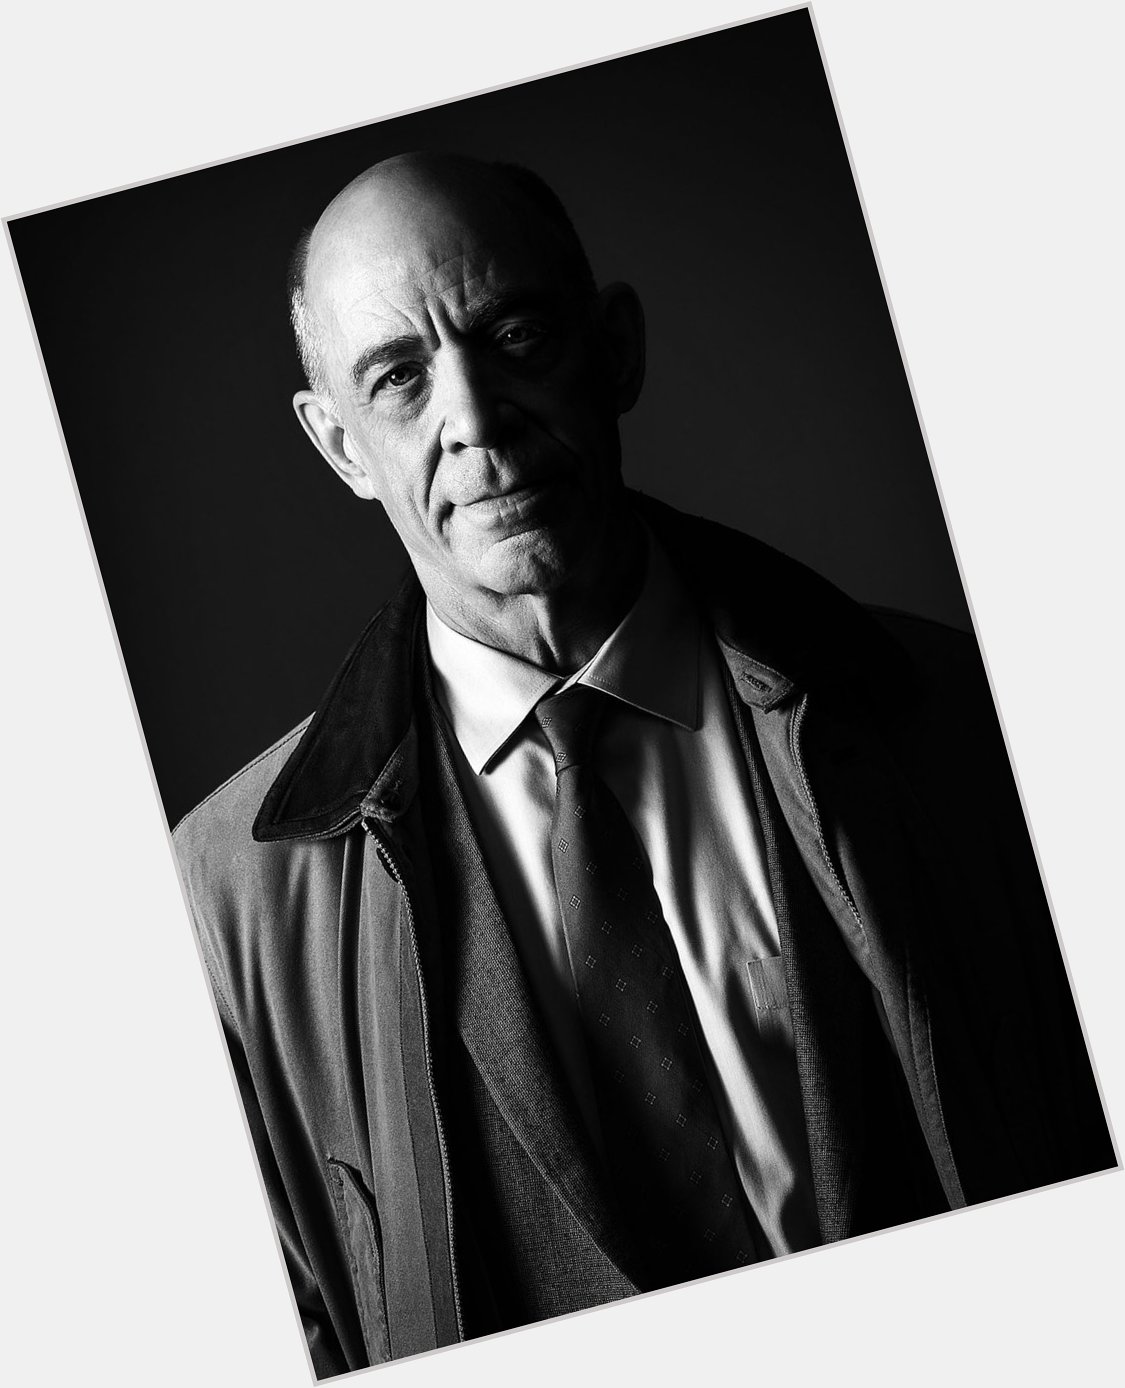 Happy Birthday to J.K. Simmons who tunrs 65 today! 